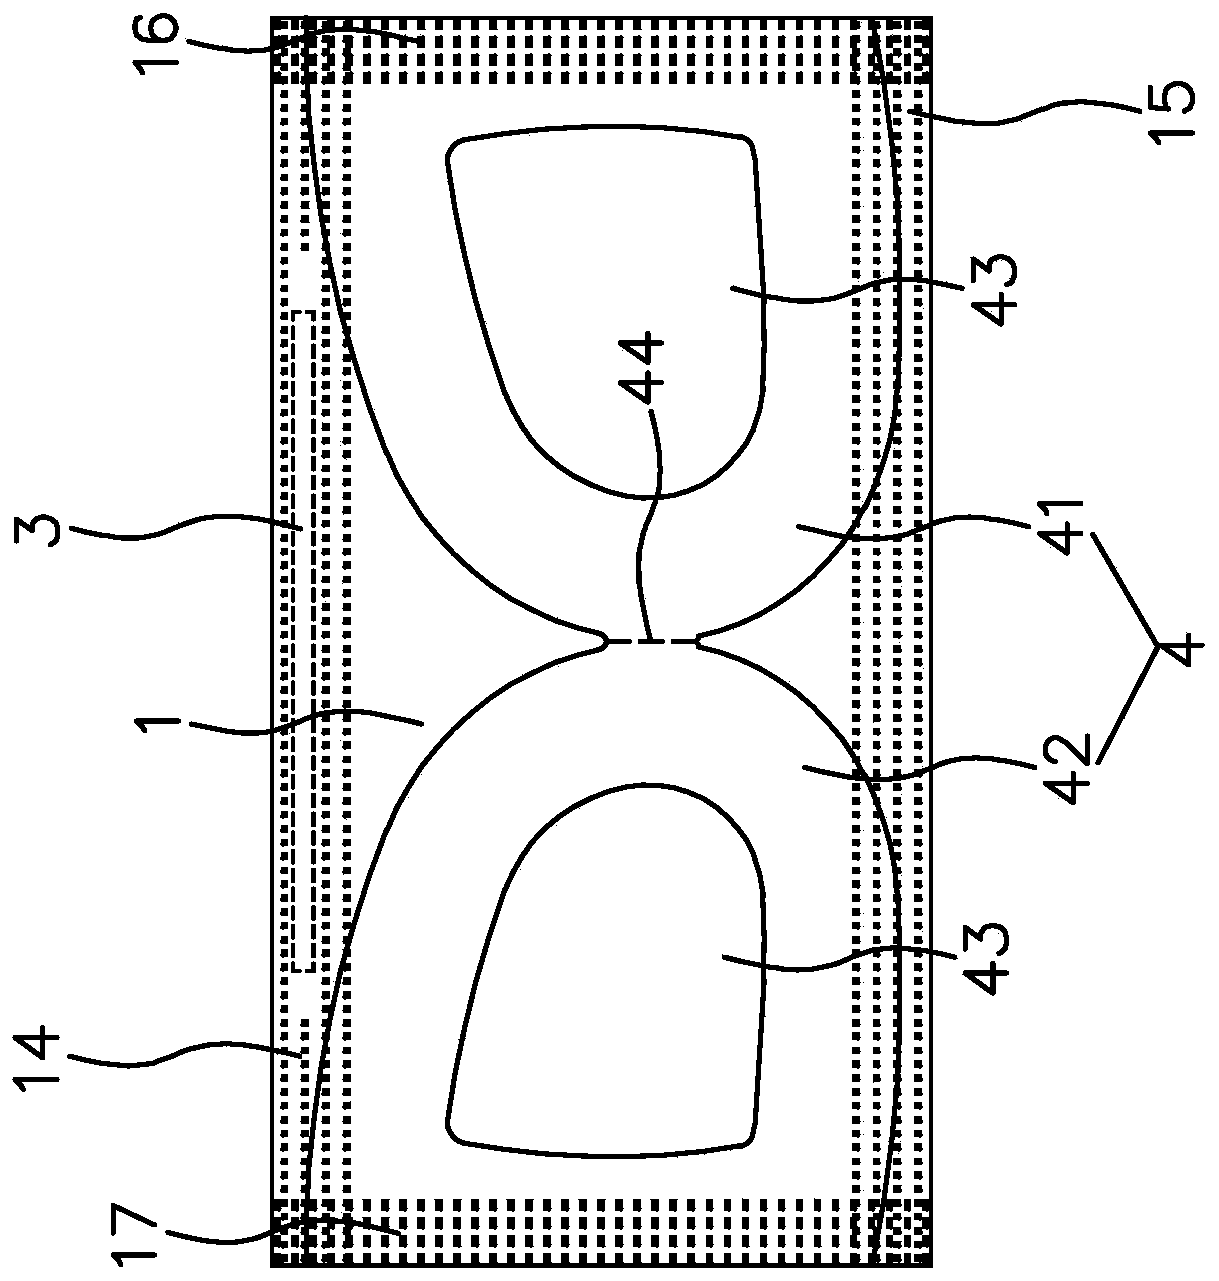 Mask production process and device for implementing process